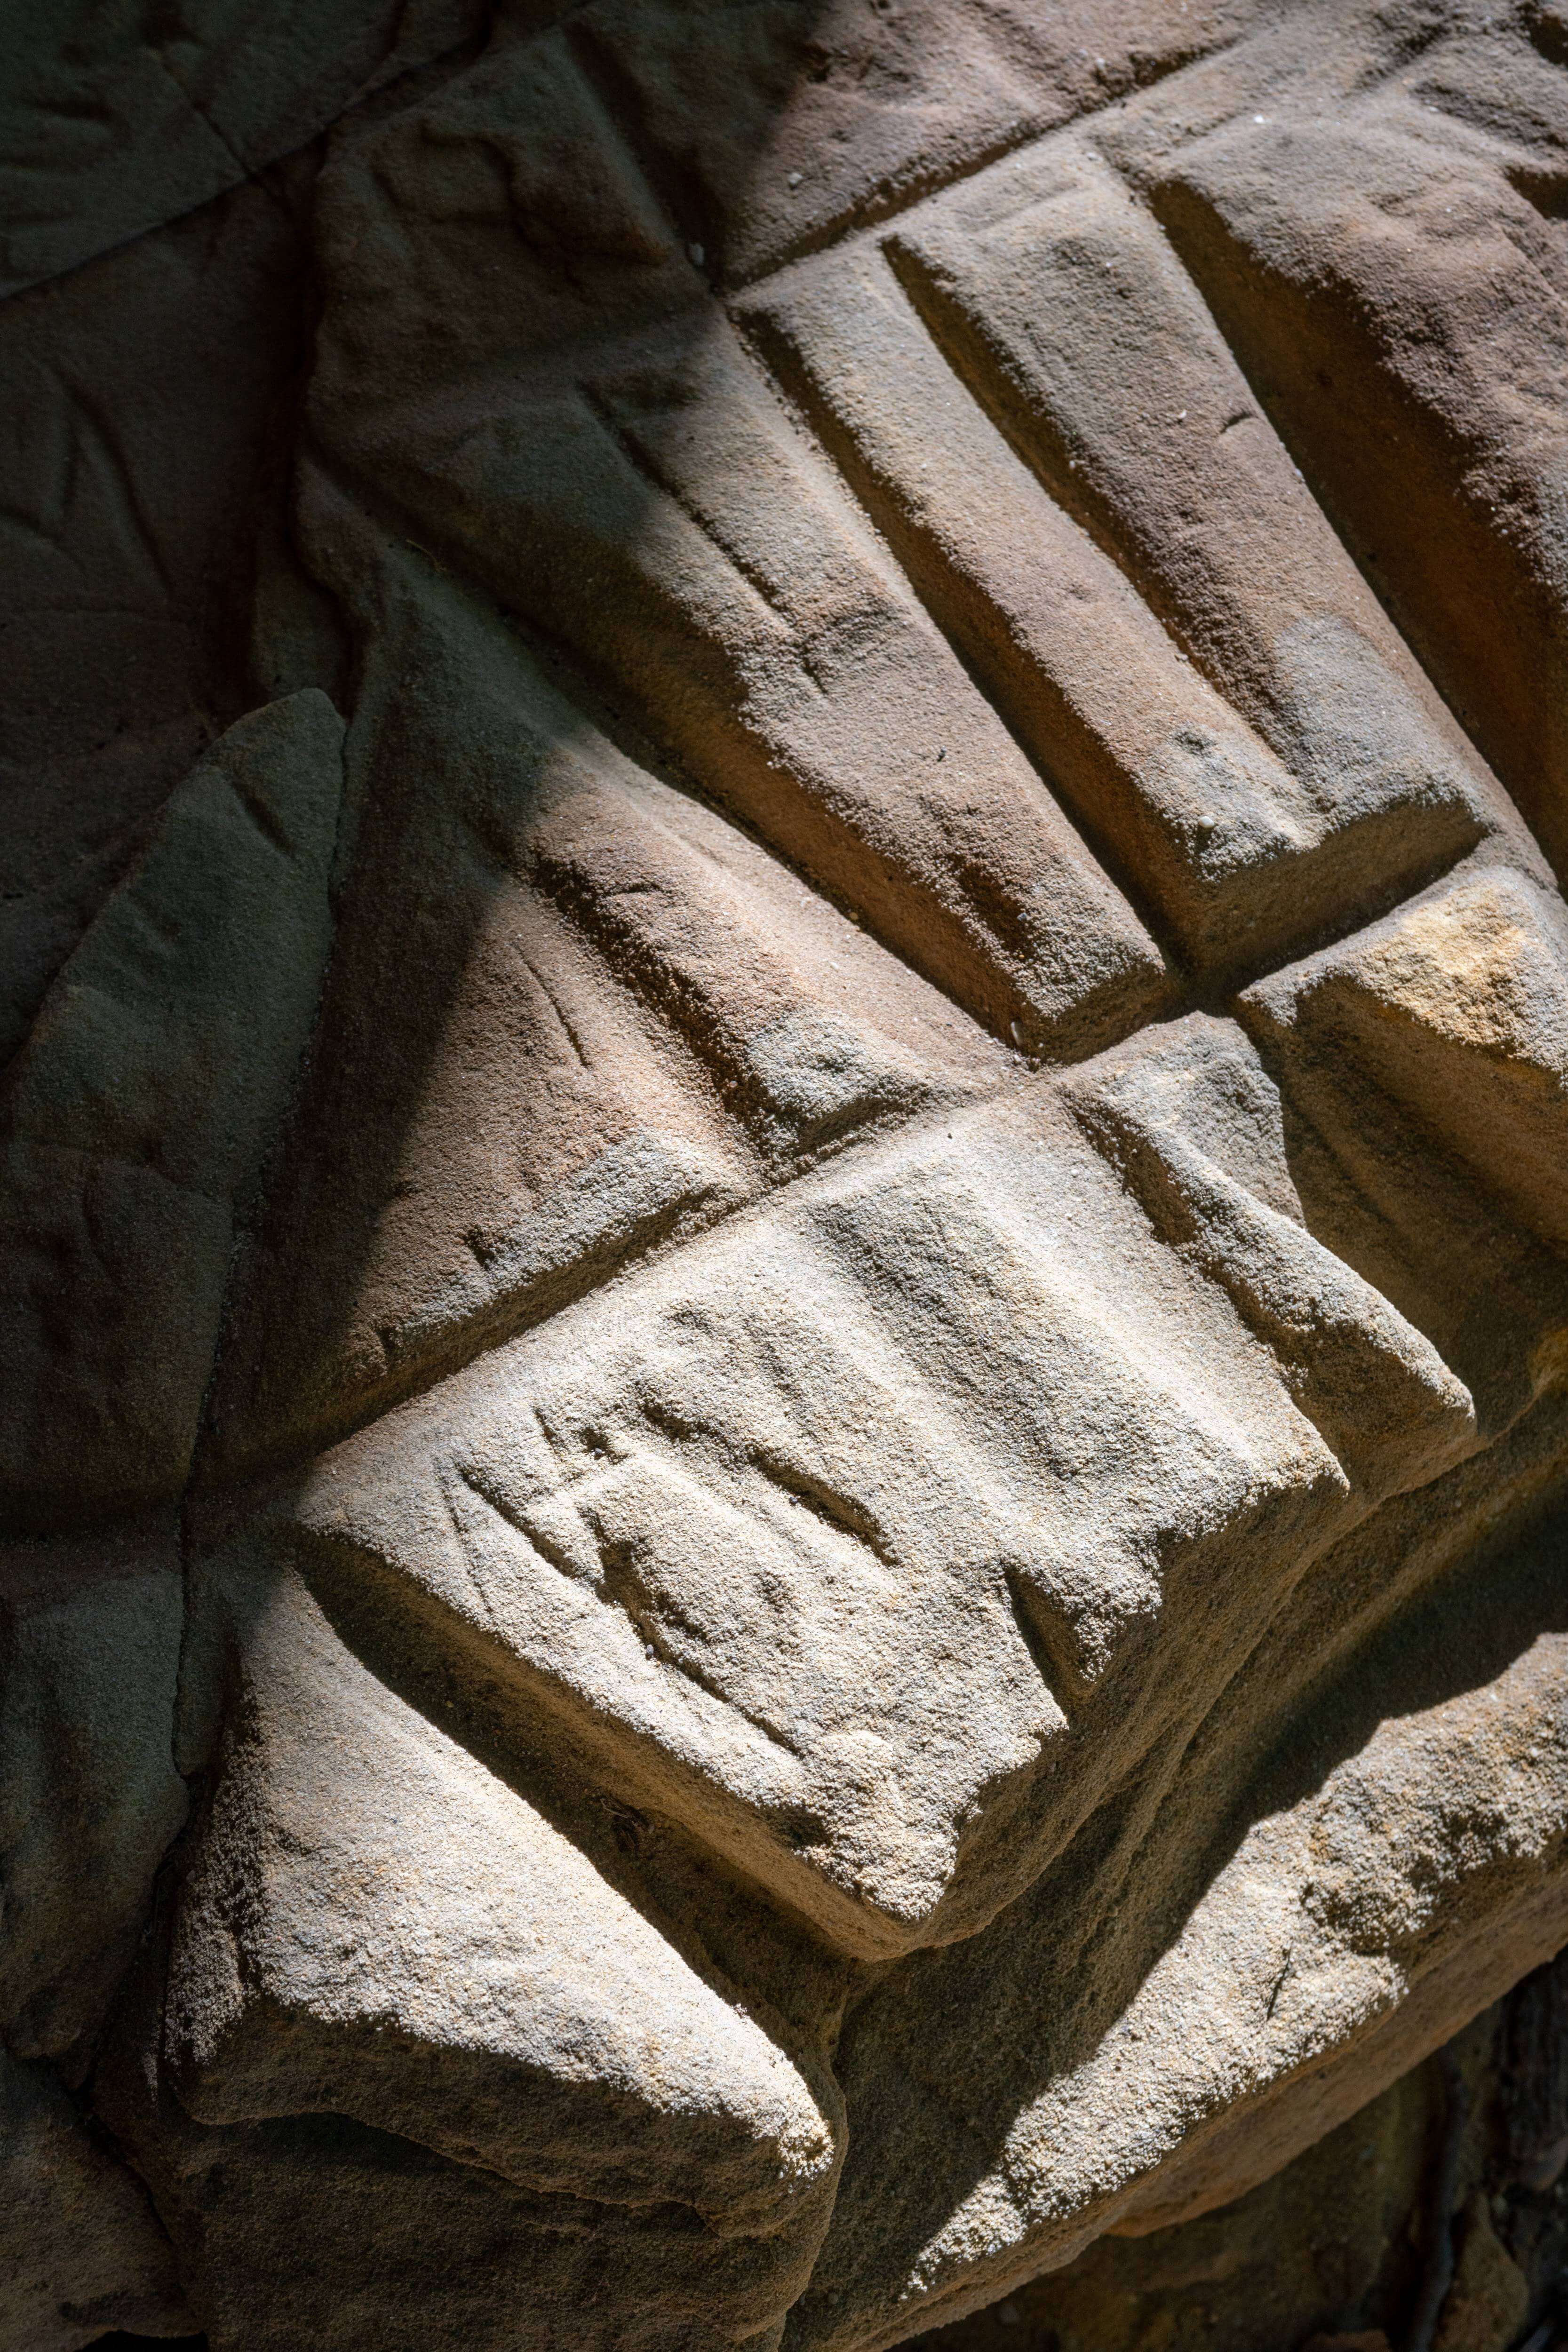 Made by ancient hands: The wall of the rock shelter featured a large stone with grooves used for sharpening stone tools and carvings by ancient Ohioans. Photo by Ben Siegel